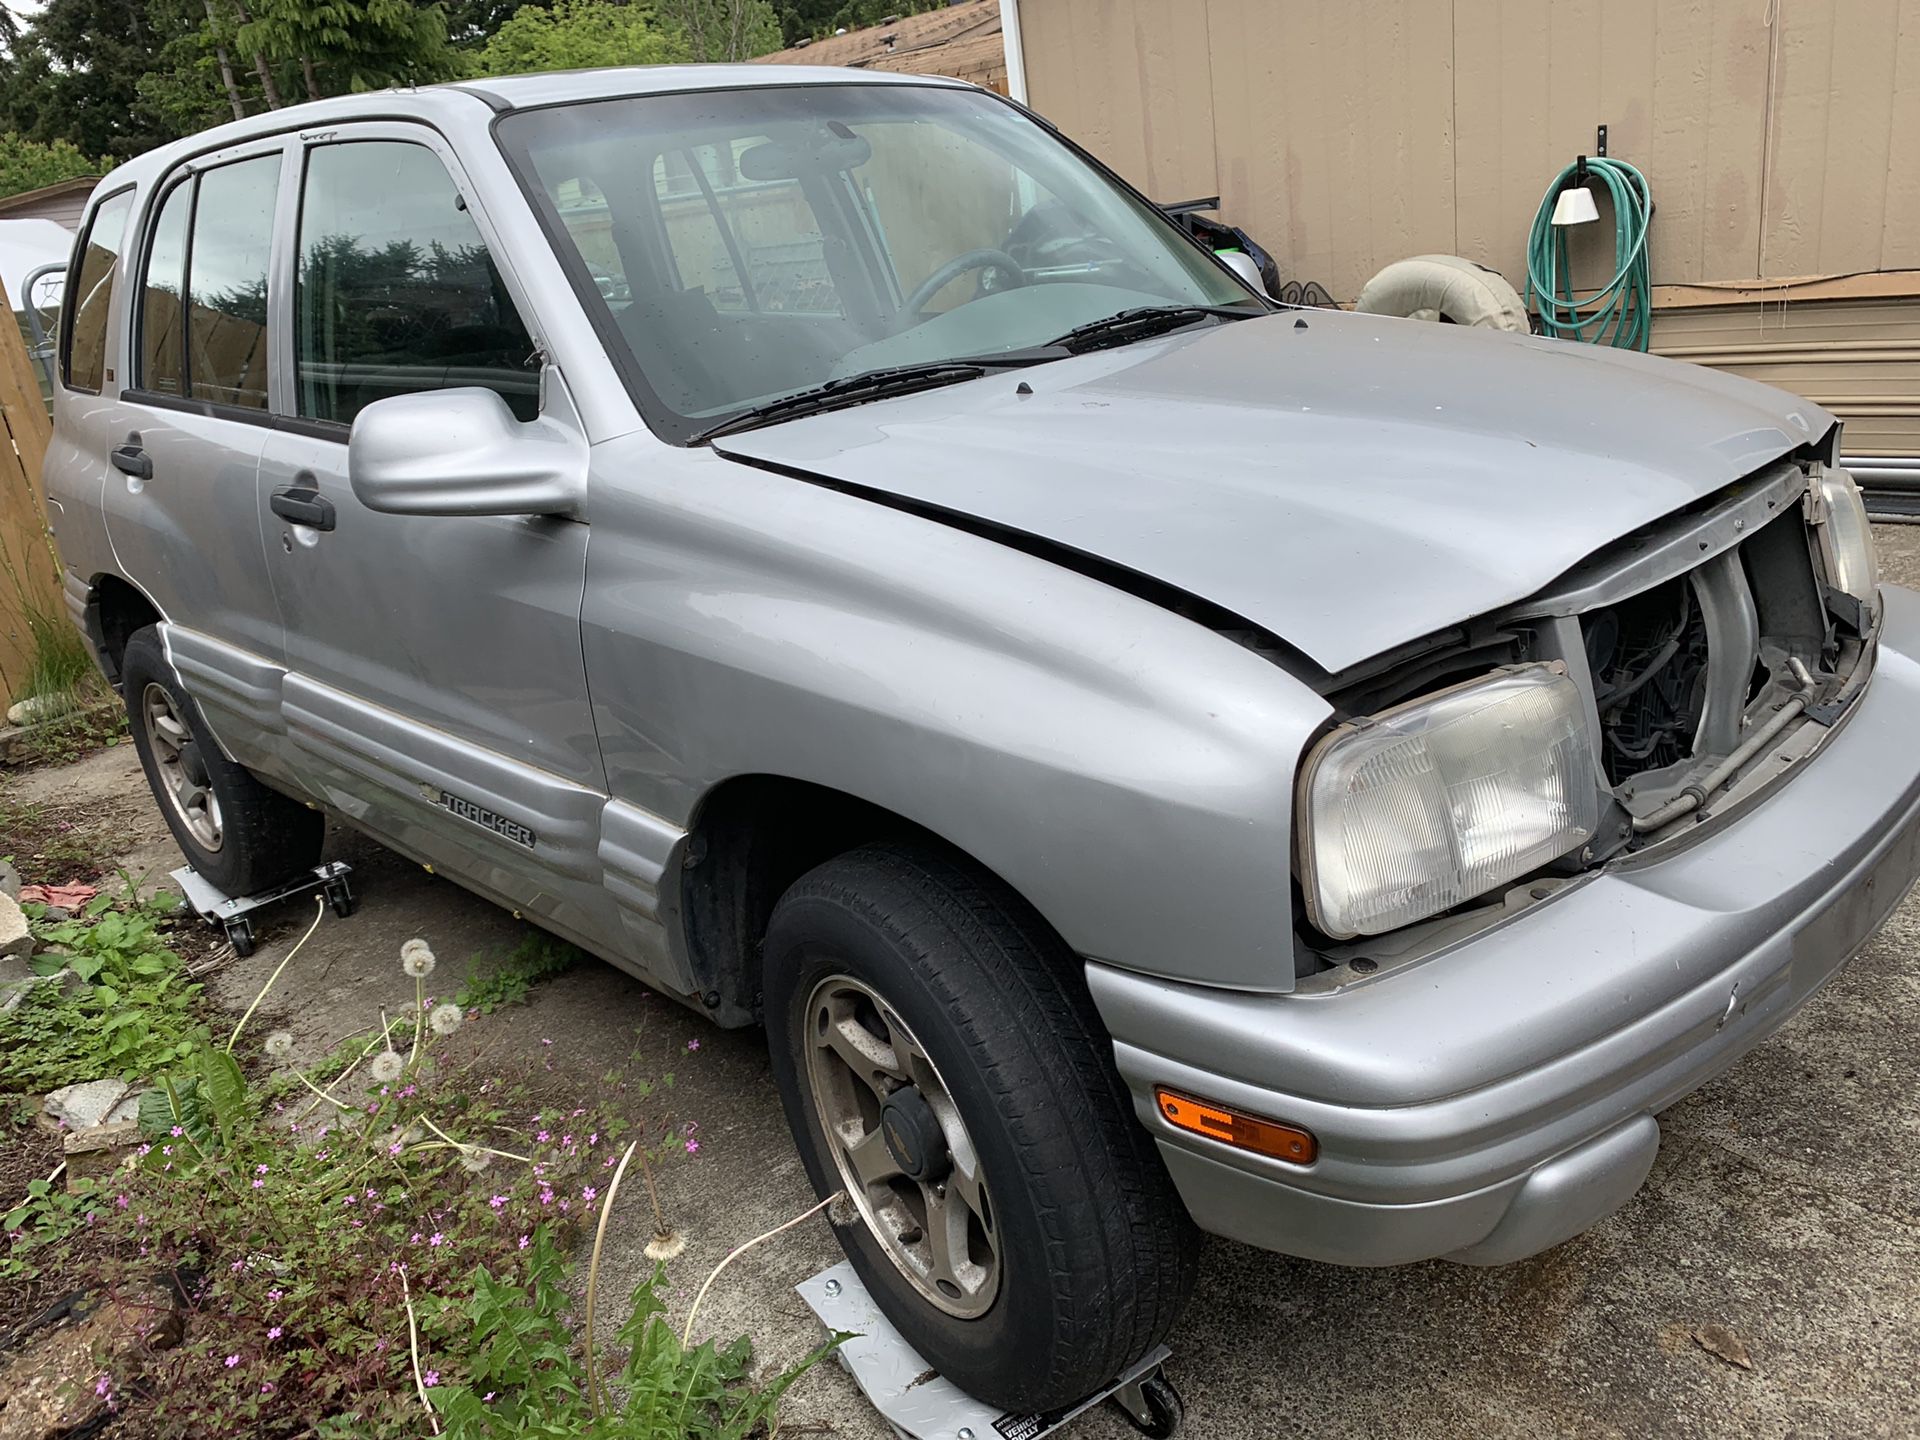 2001 chevy tracker V6 2.5L for parts